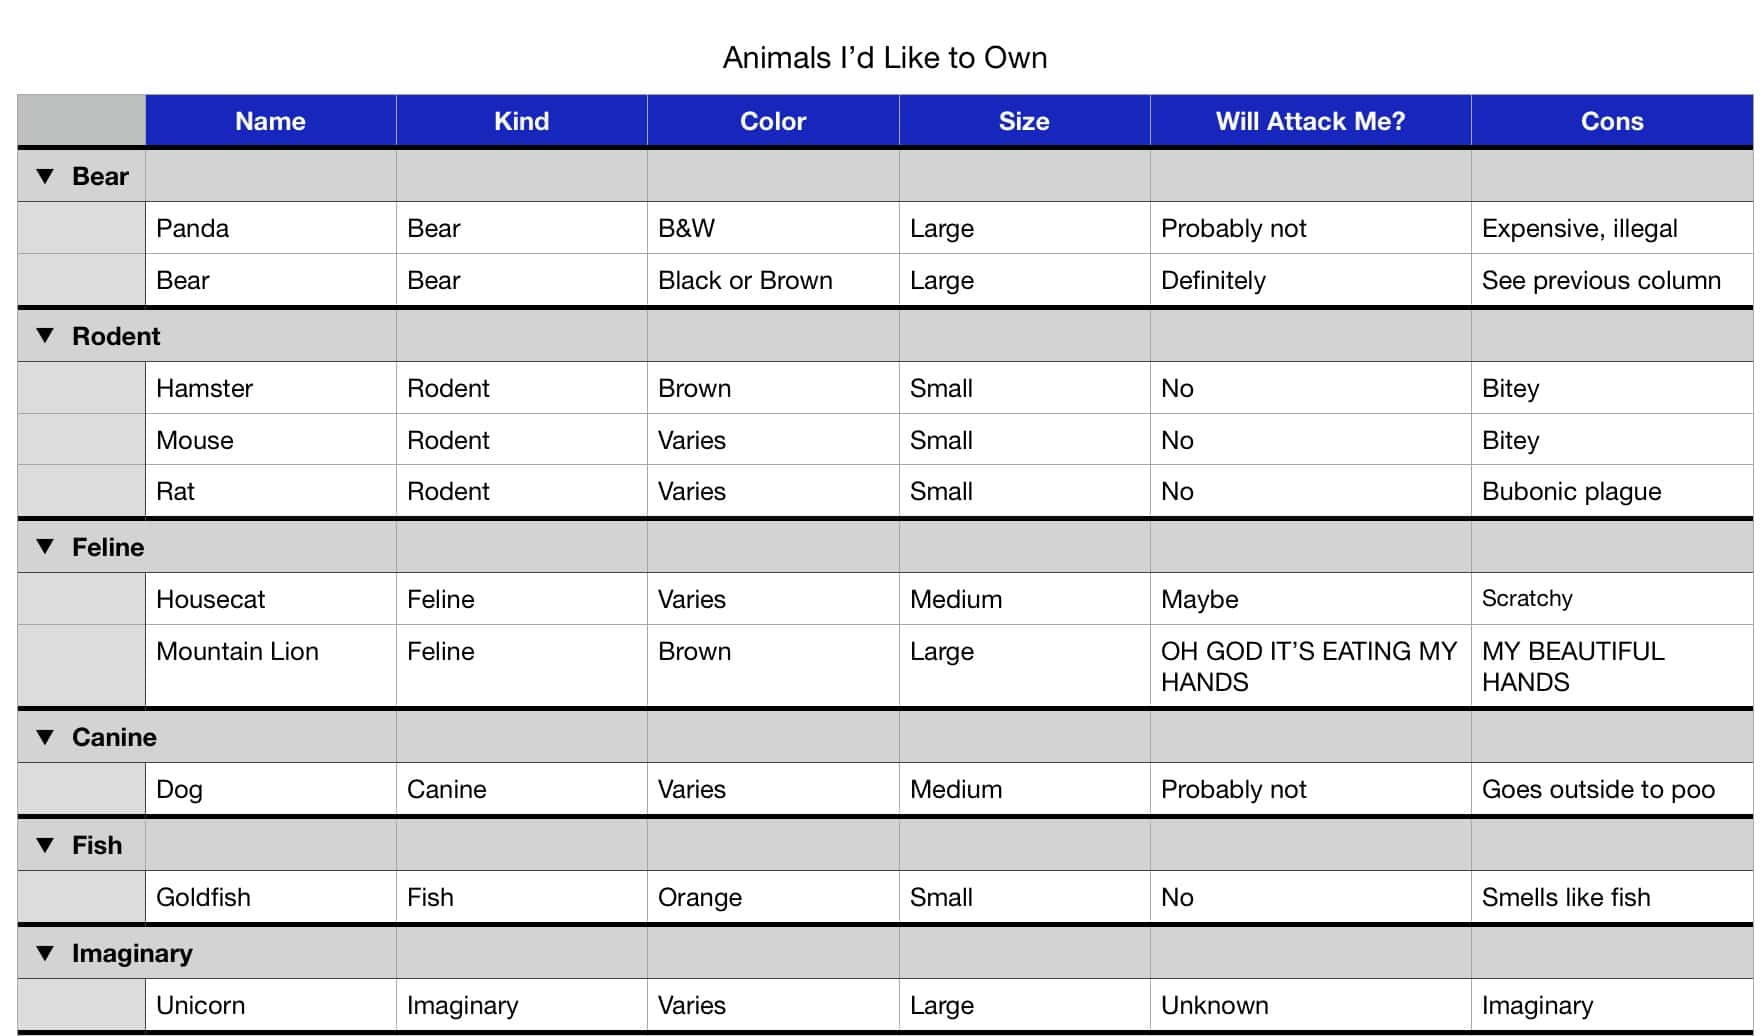 "Animals I'd Like to Own" Spreadsheet Sorted